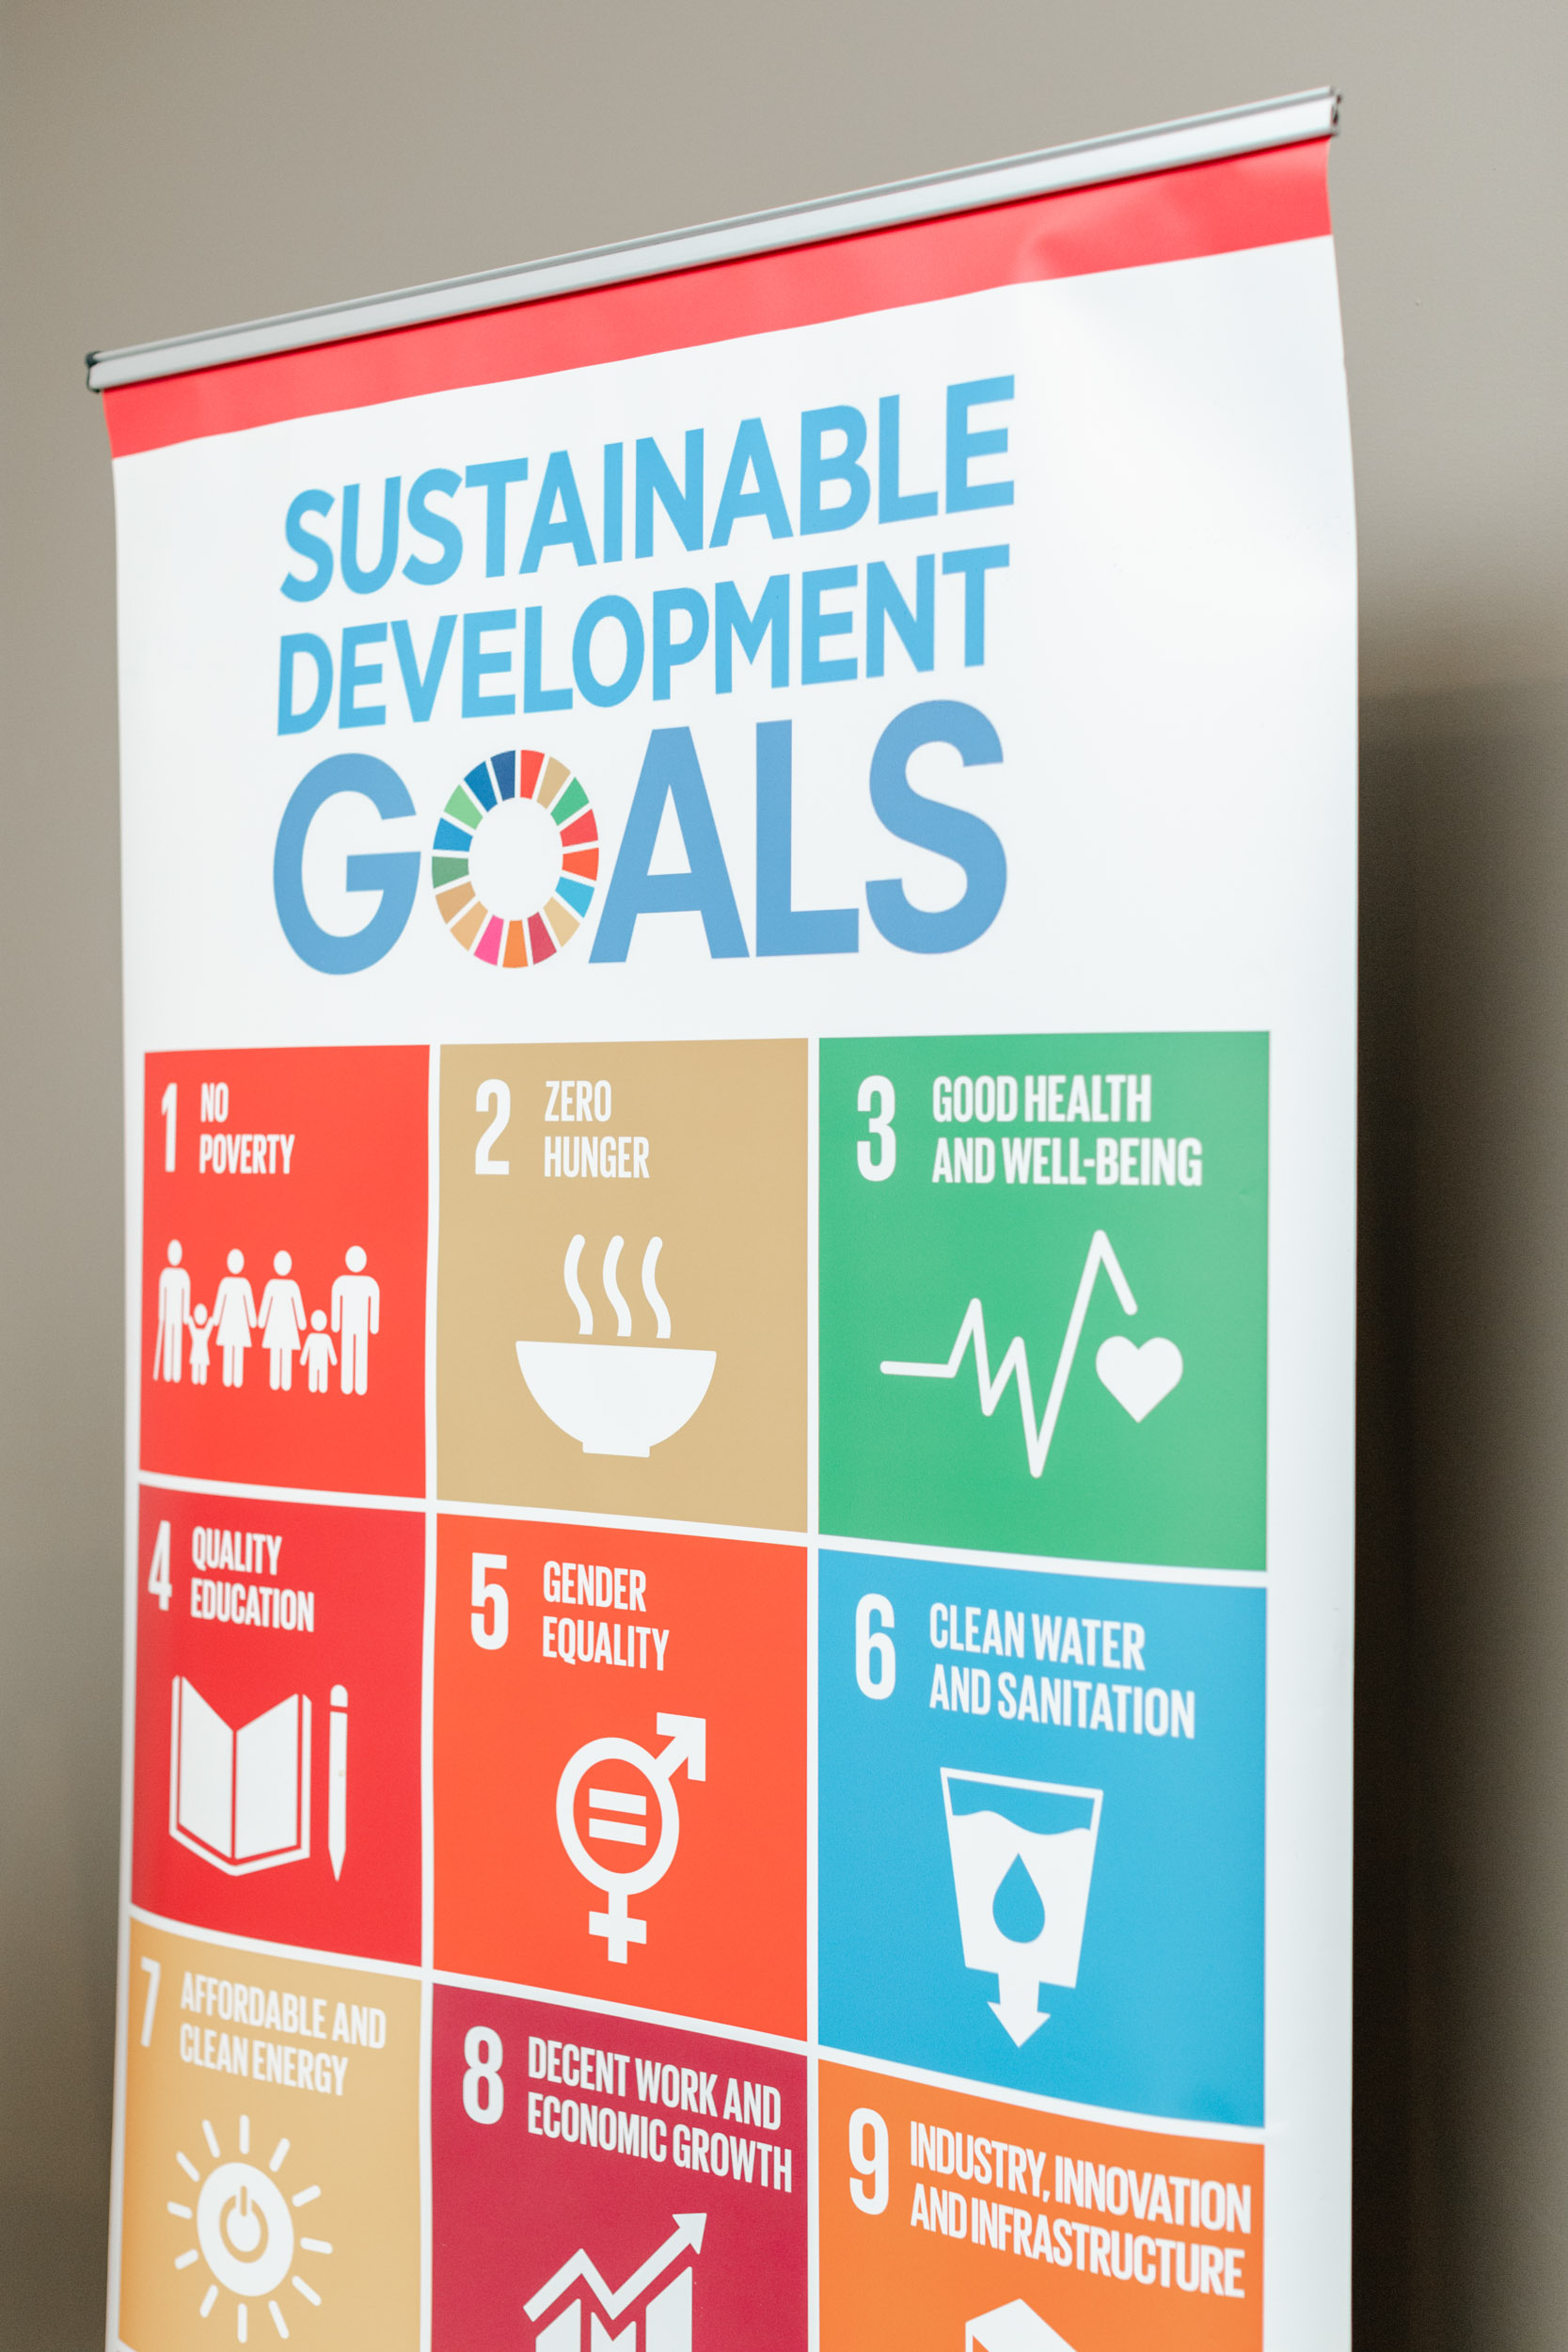 Sustainable development goals conference poster.